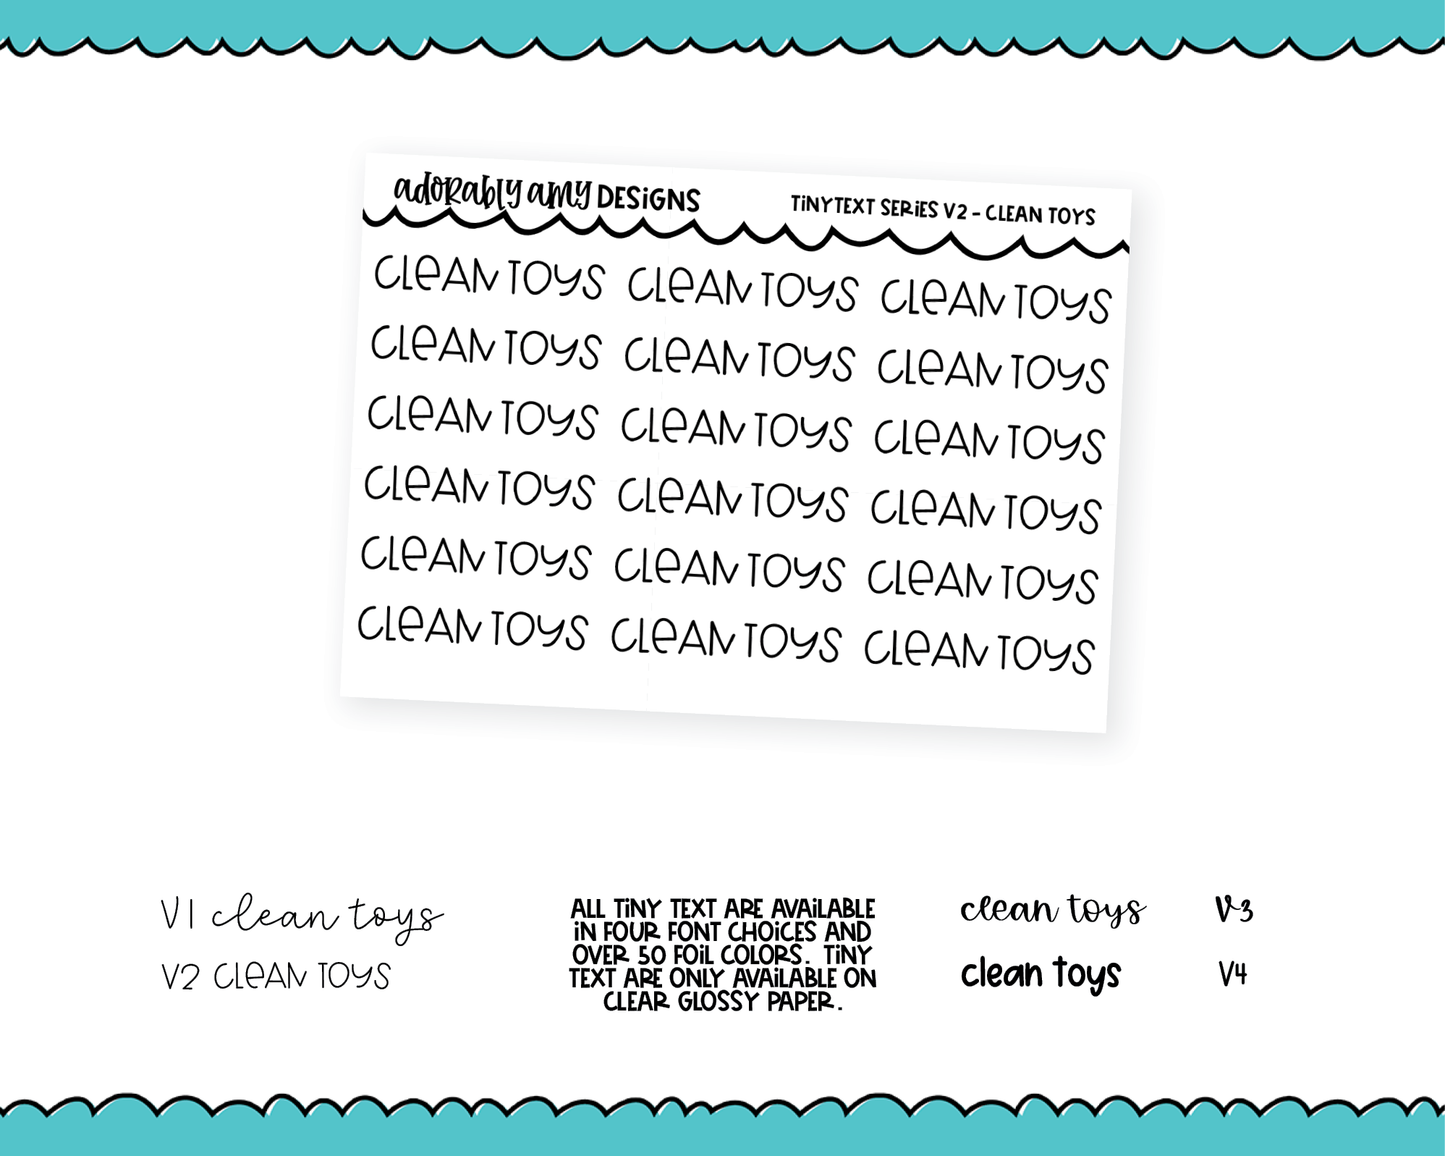 Foiled Tiny Text Series - Clean Toys Checklist Size Planner Stickers for any Planner or Insert